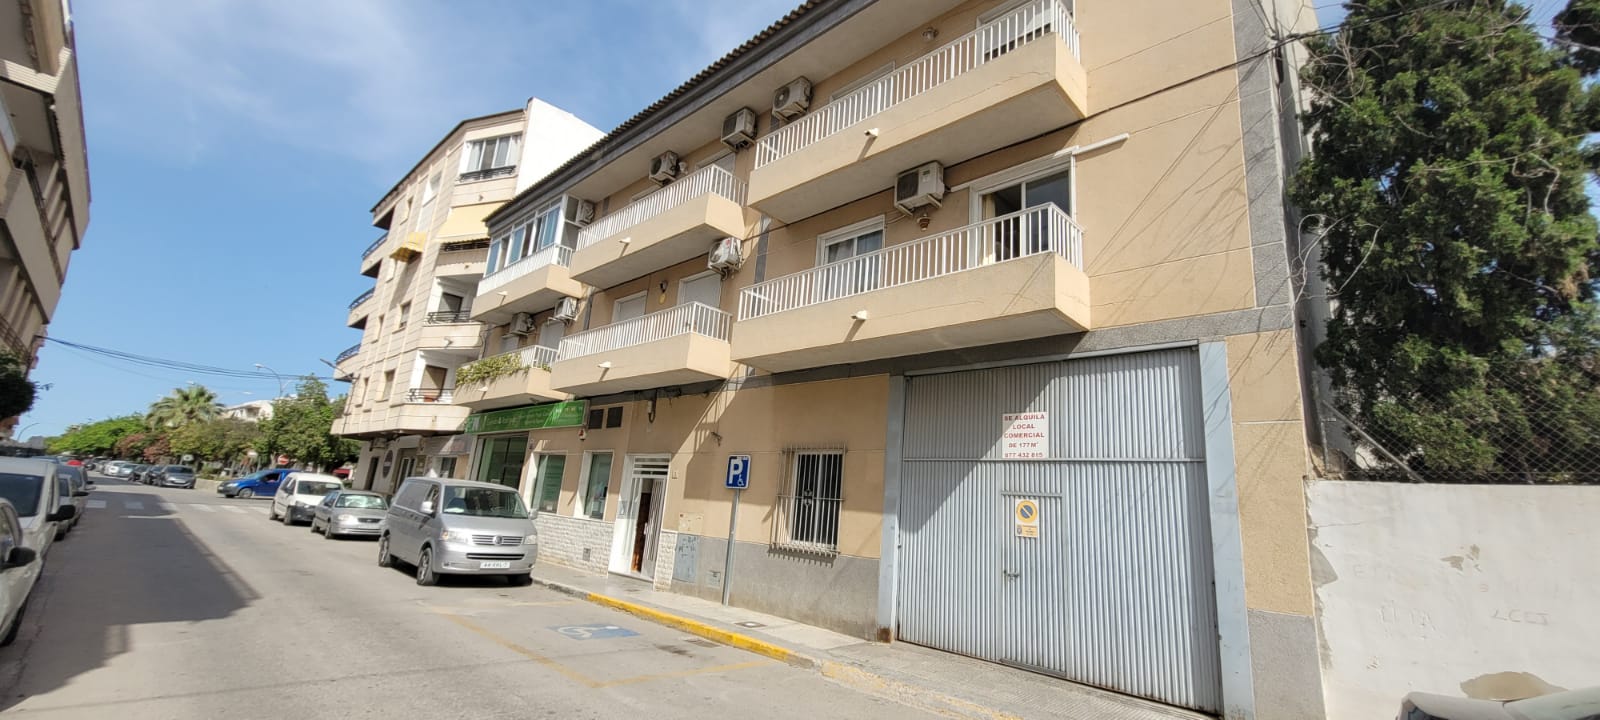 3 bedroom apartment / flat for sale in Dolores, Costa Blanca